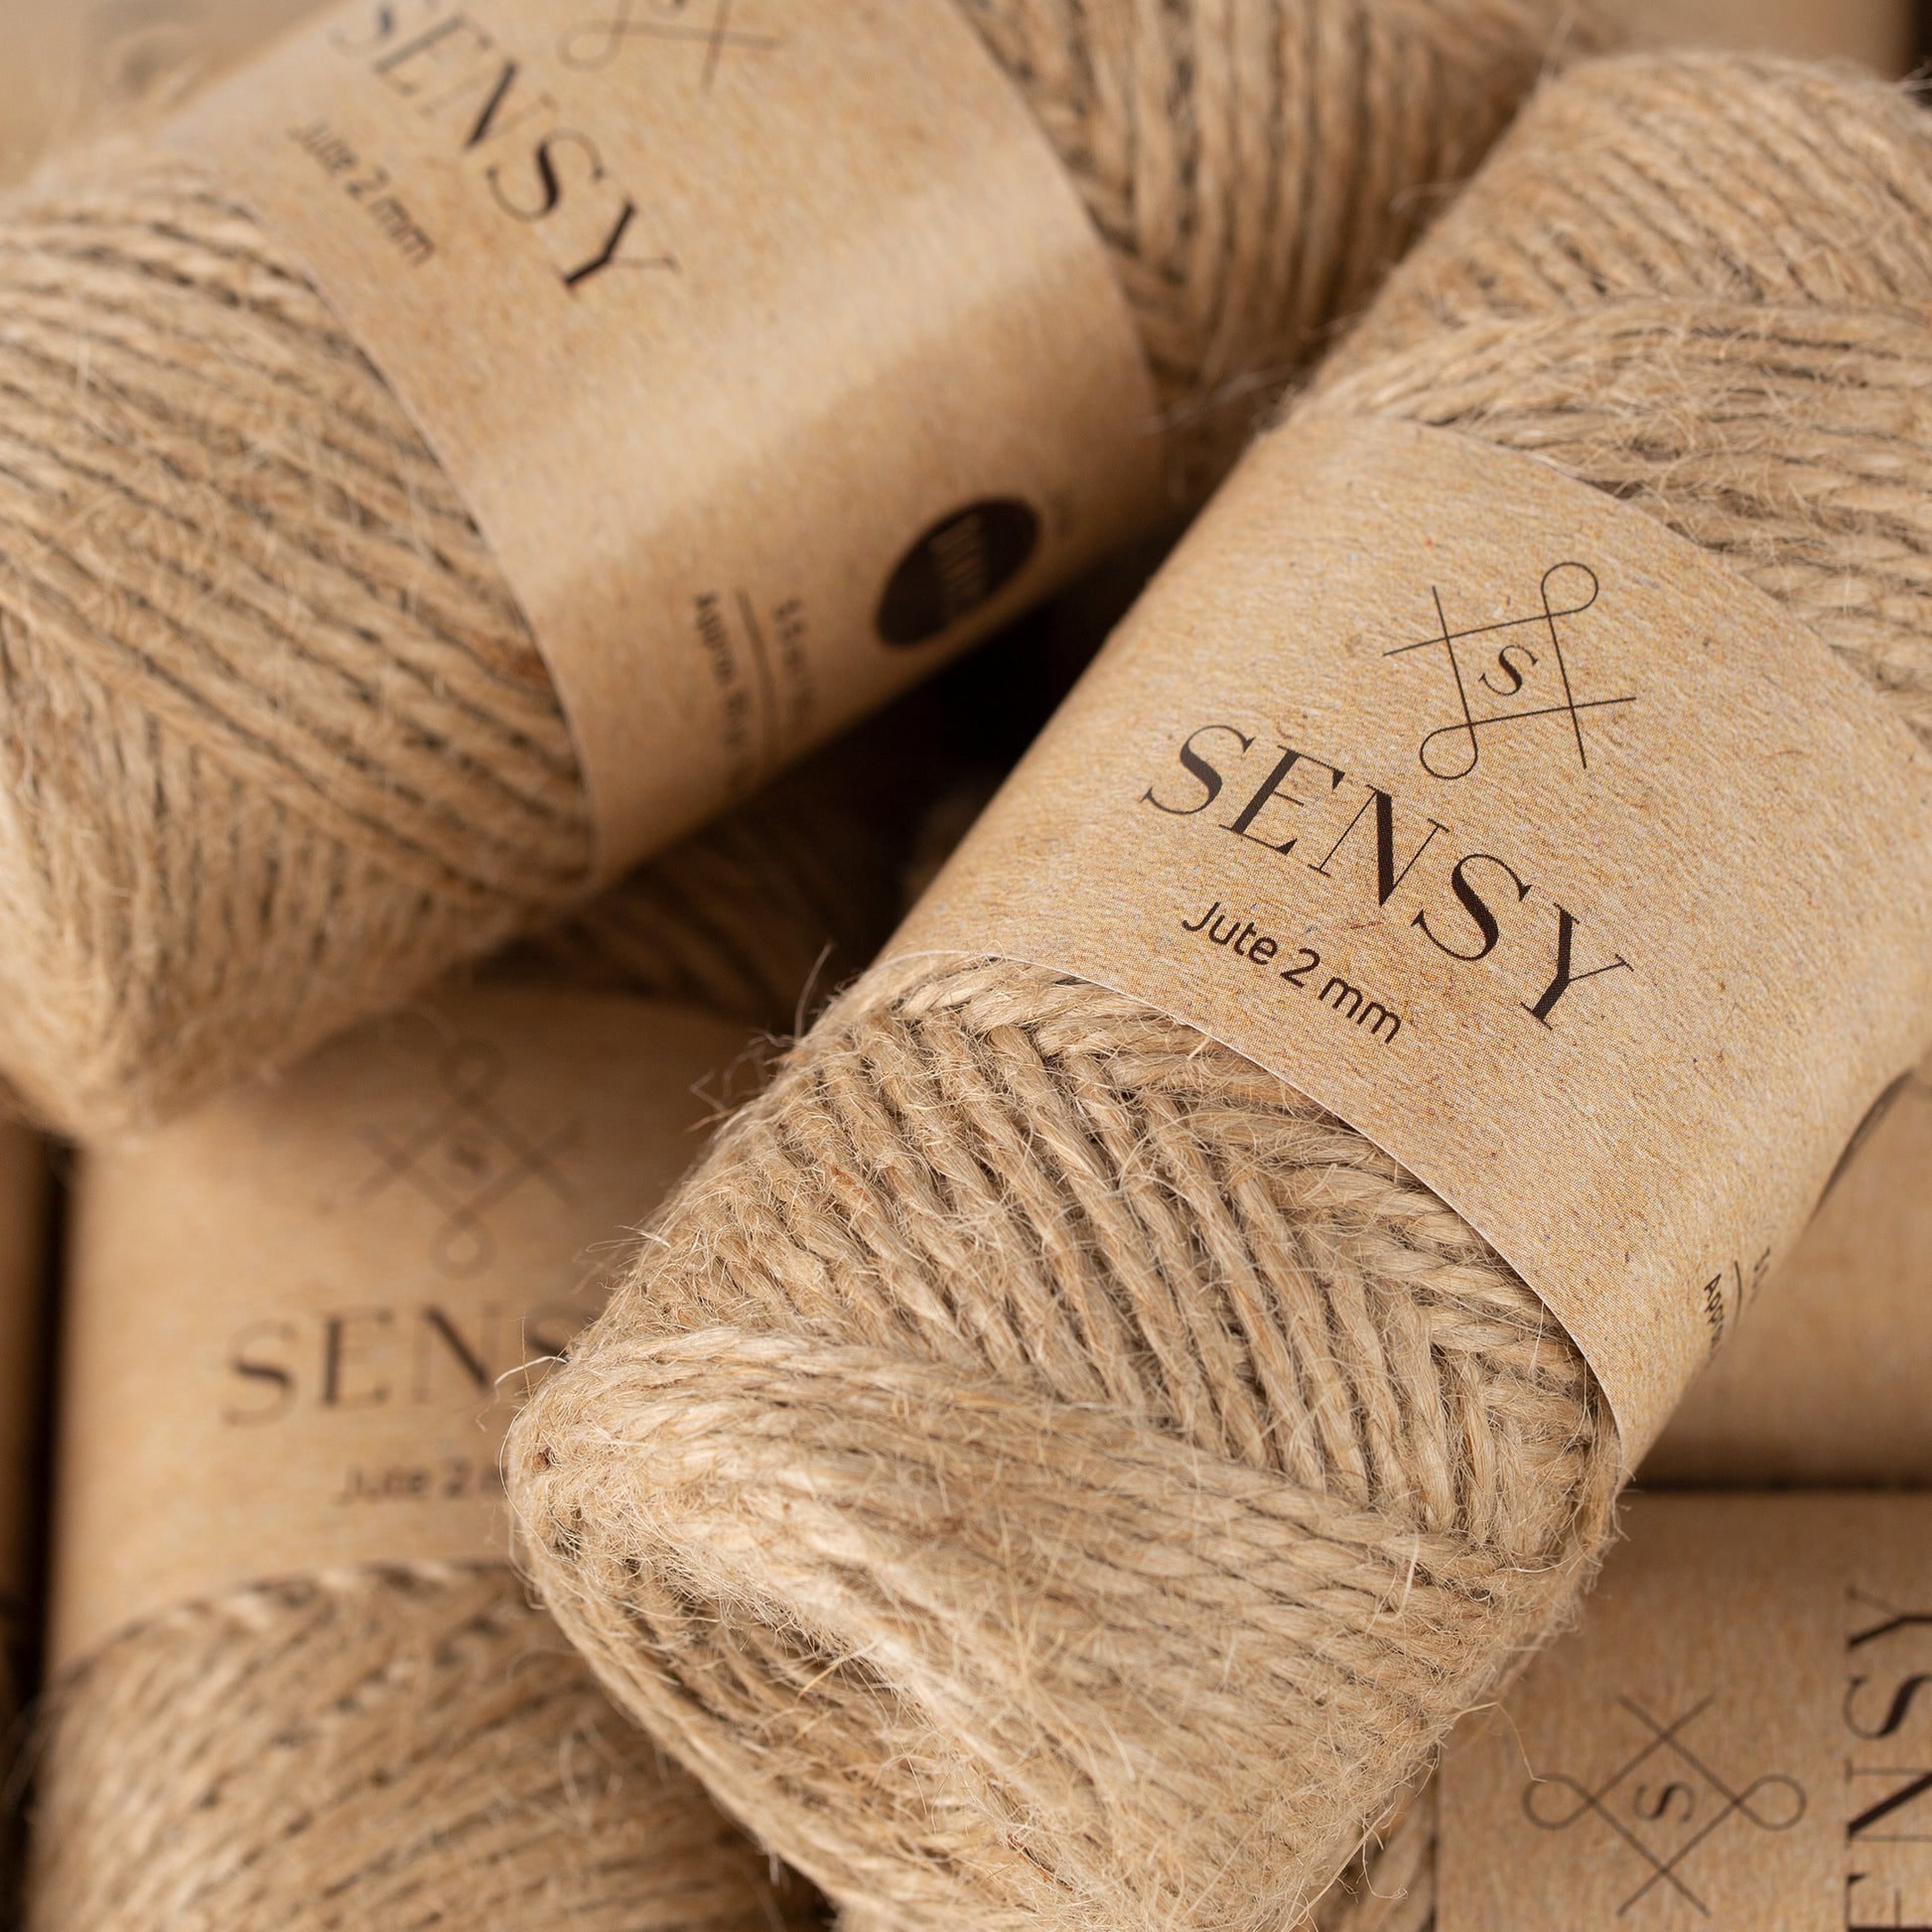 Sensy Premium Natural Jute Twine Best Arts Crafts Gift Twine Christmas Twine Durable Packing String (328 Feet)